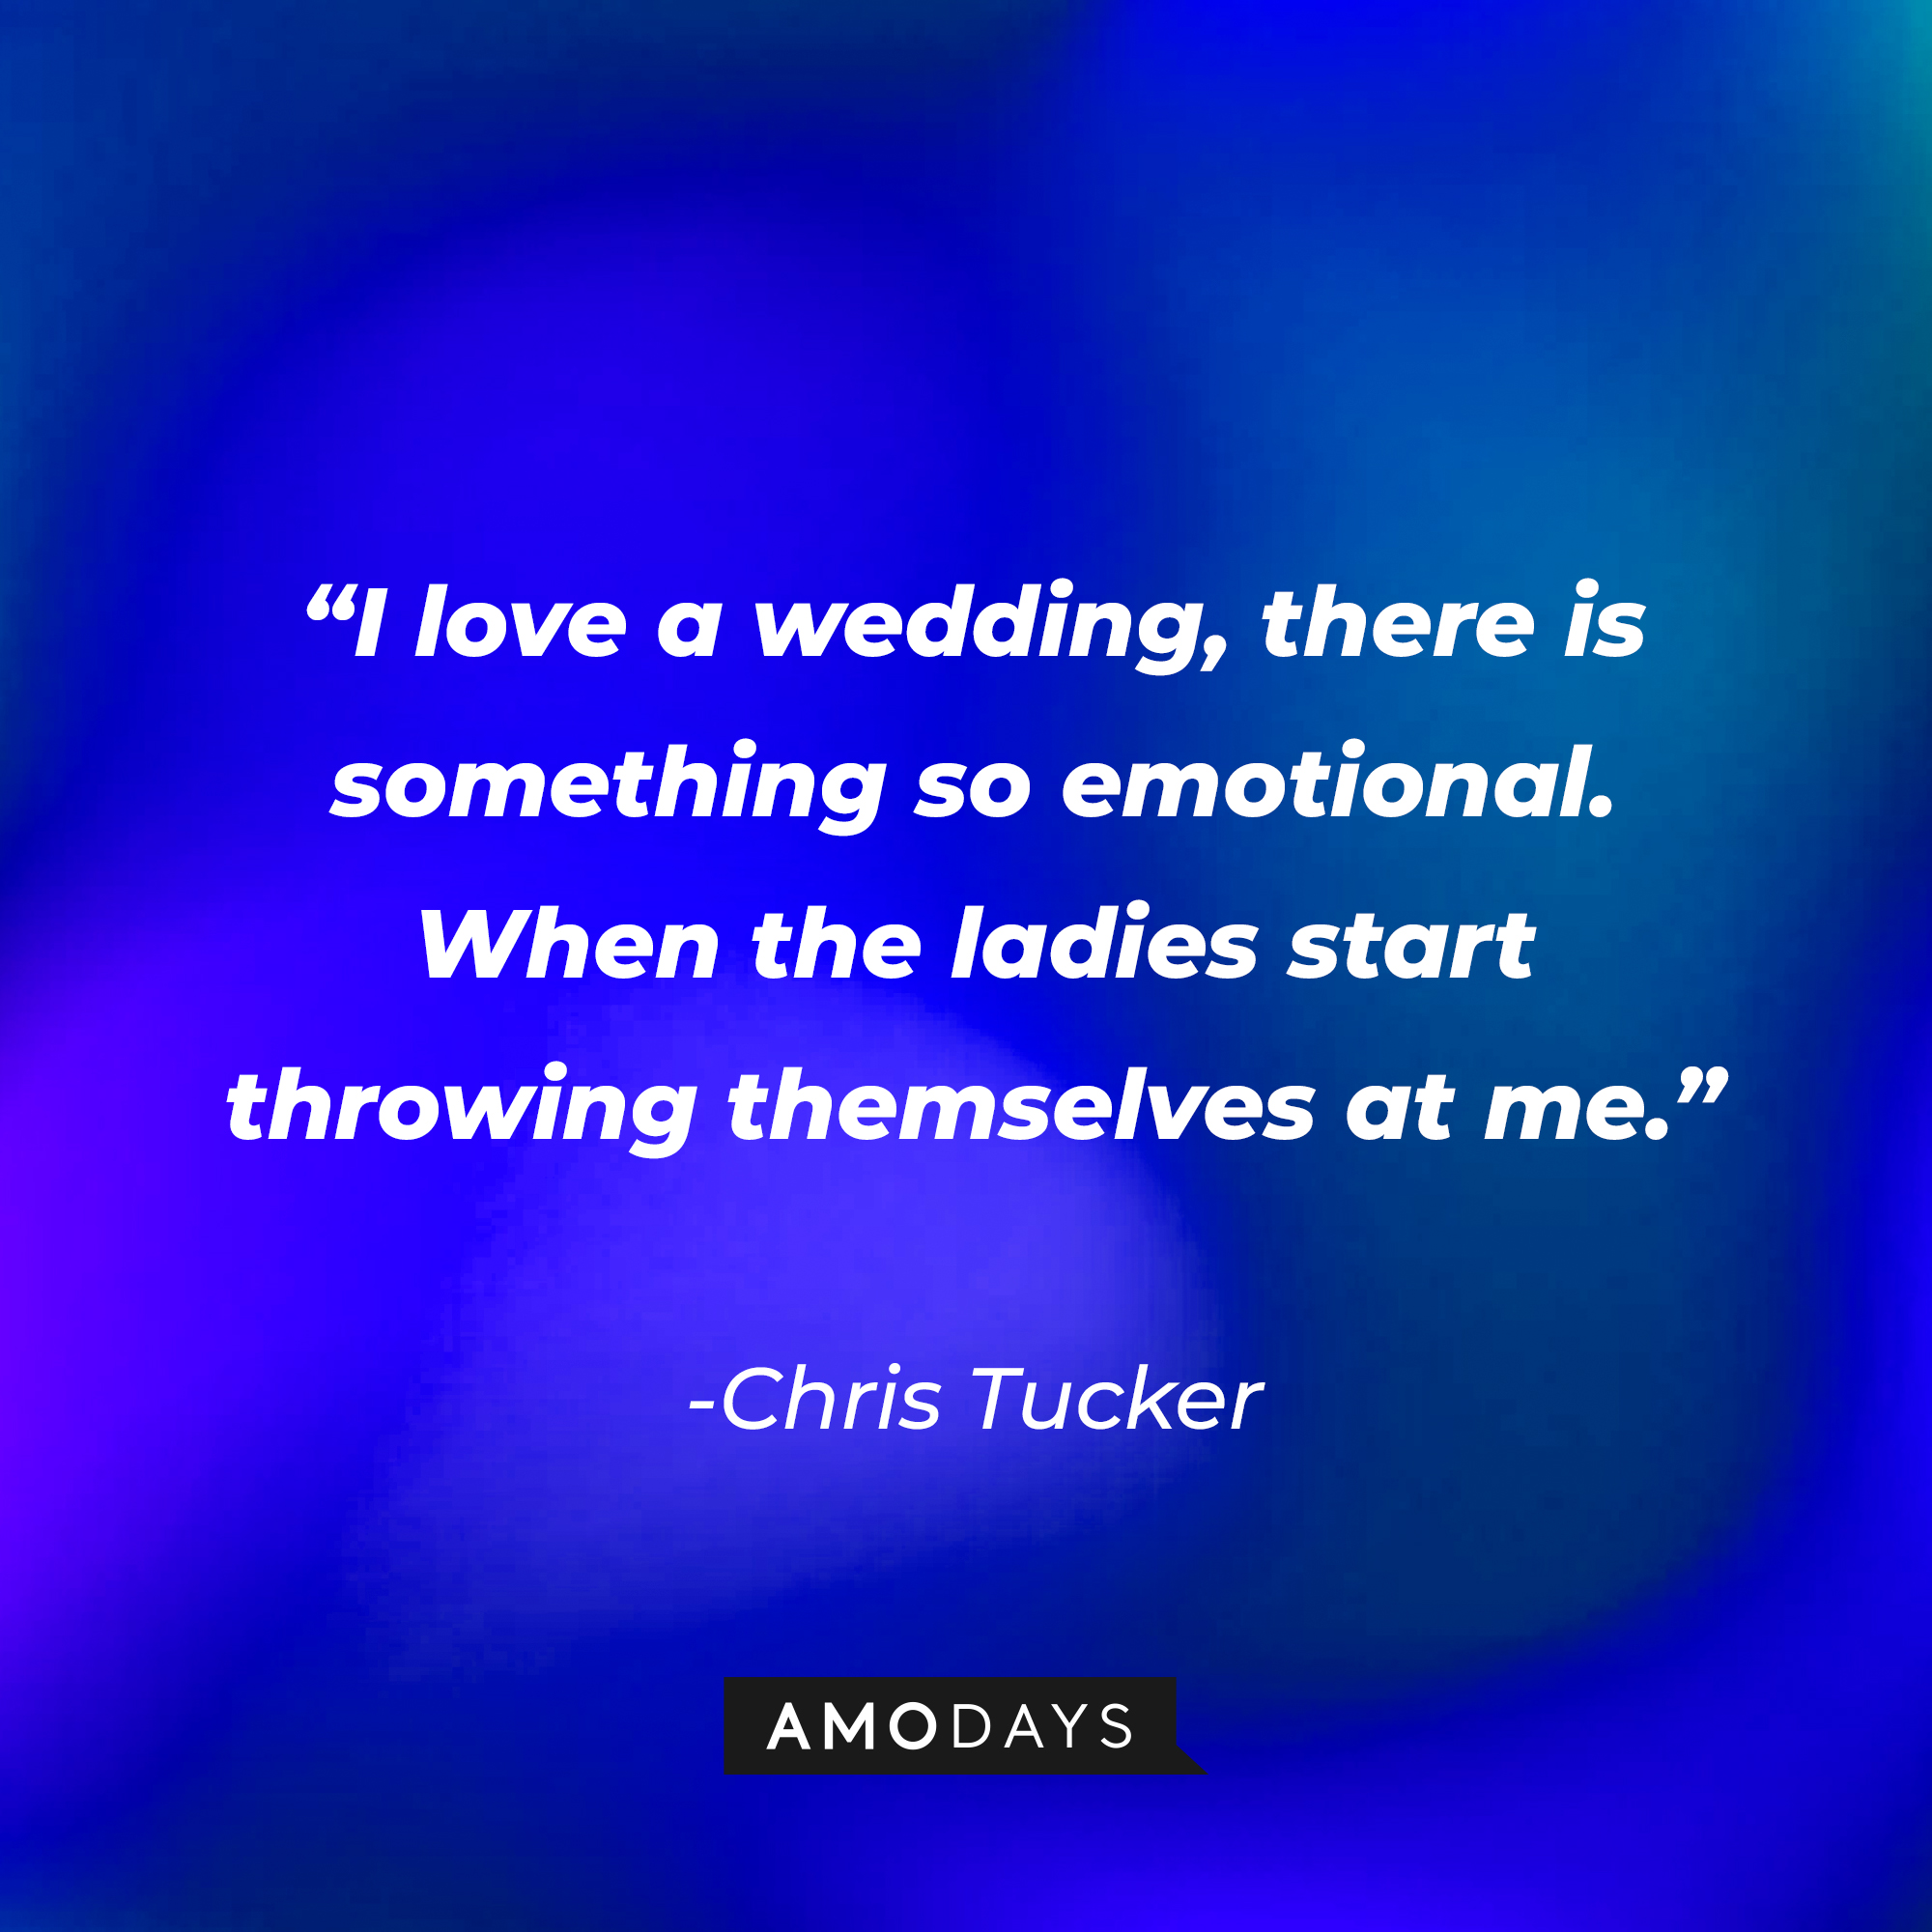 Chris Tucker’s quote: “I love a wedding, there is something so emotional. When the ladies start throwing themselves at me.”┃Source: AmoDays